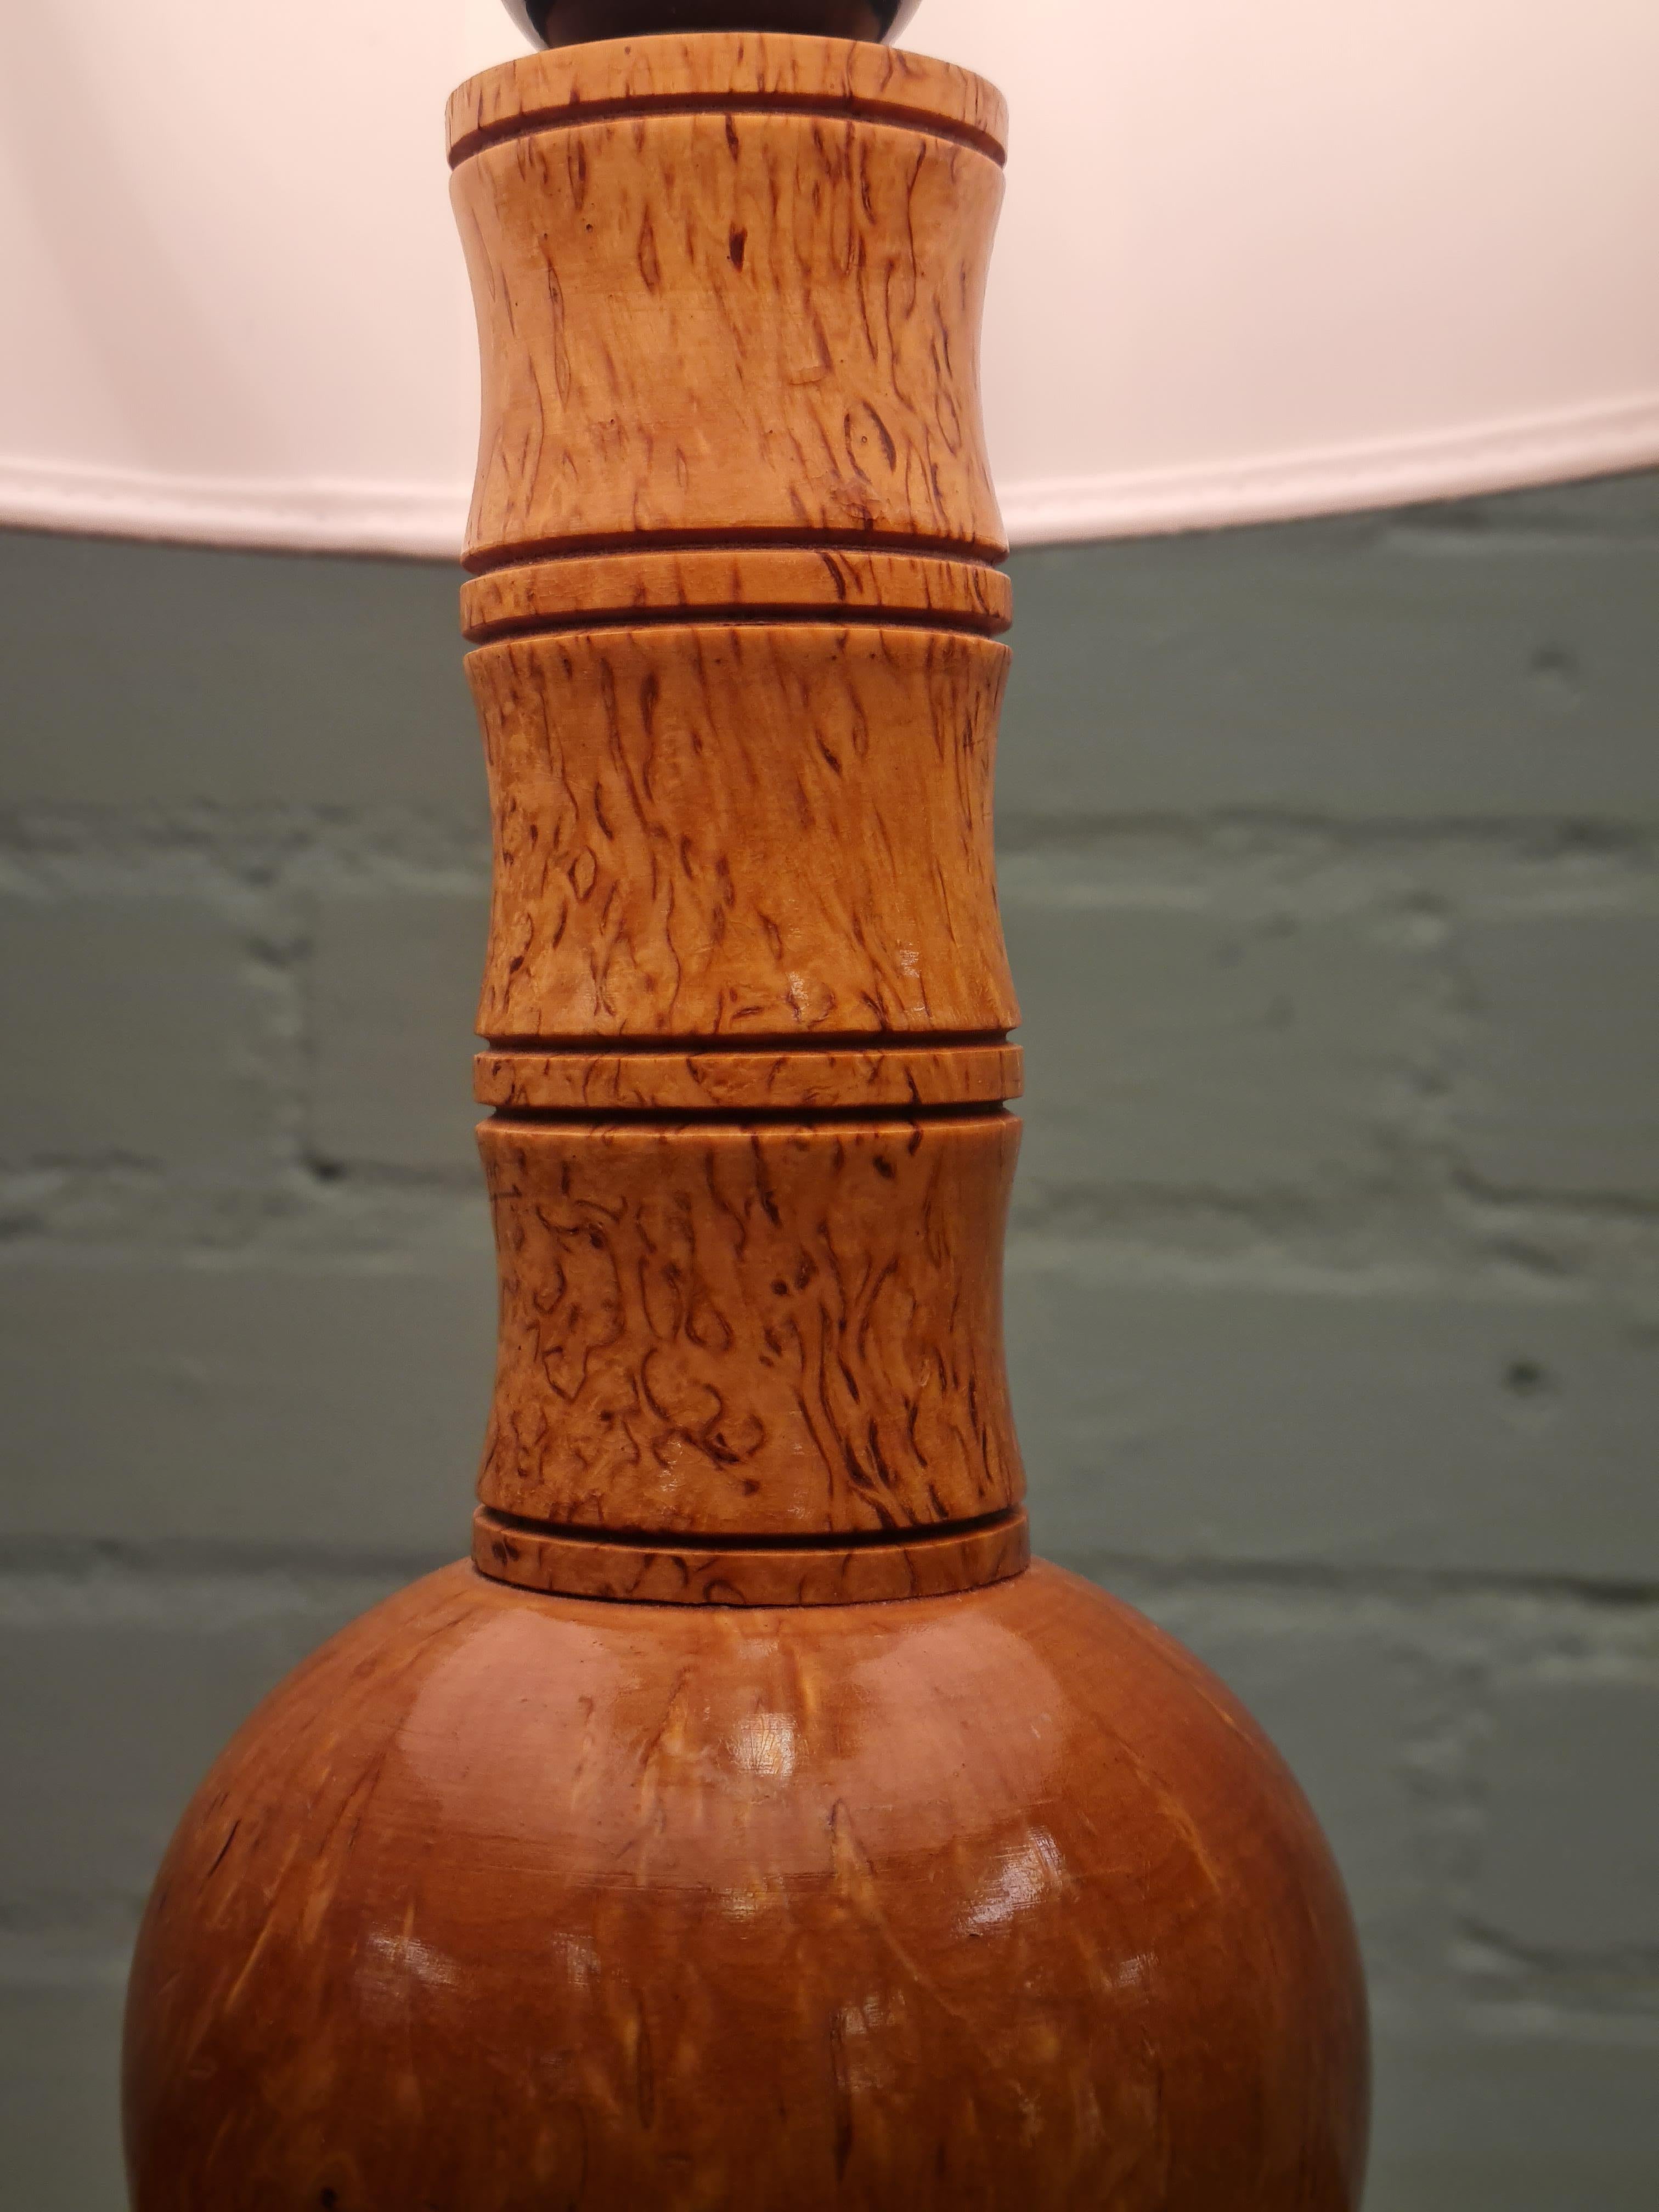 Finnish Curly Silver Birch Burl Tablelamp 1940s For Sale 2